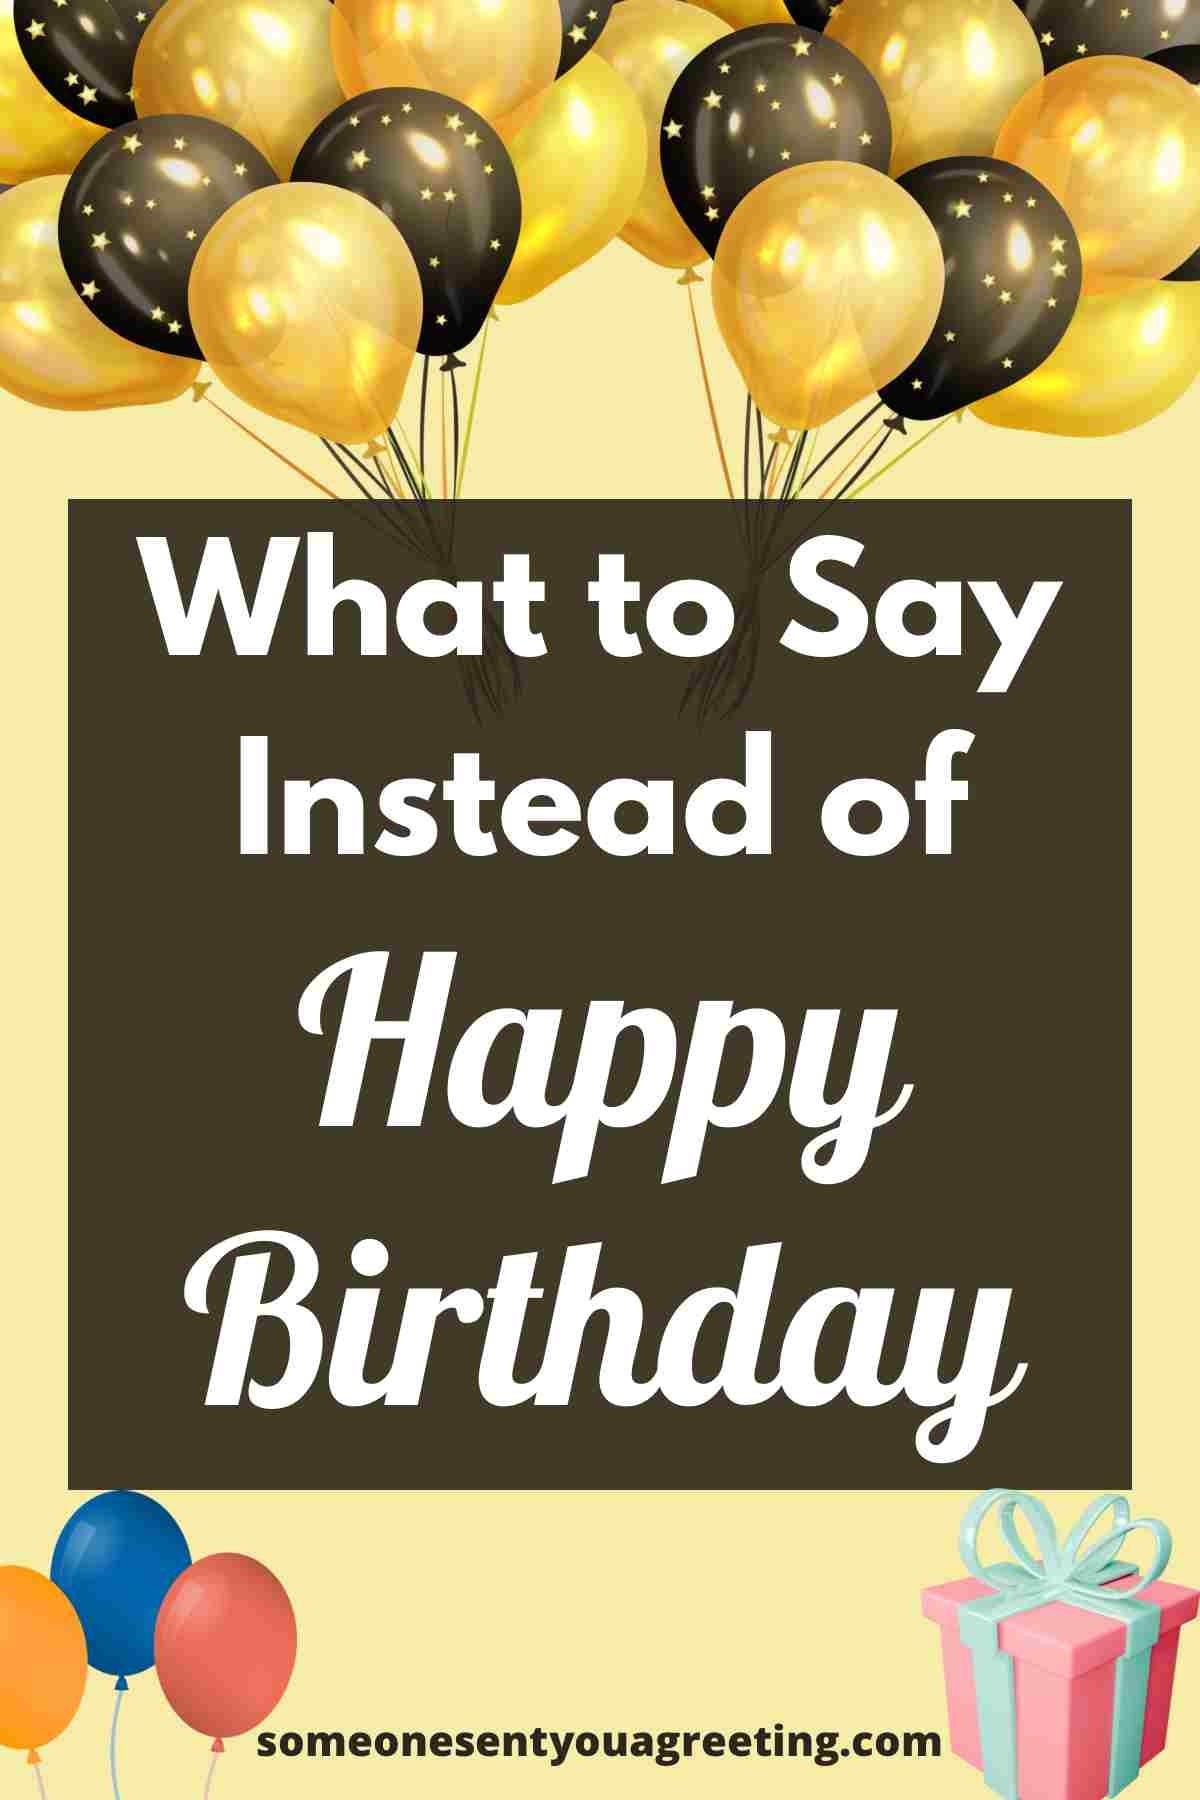 What to say instead of Happy birthday